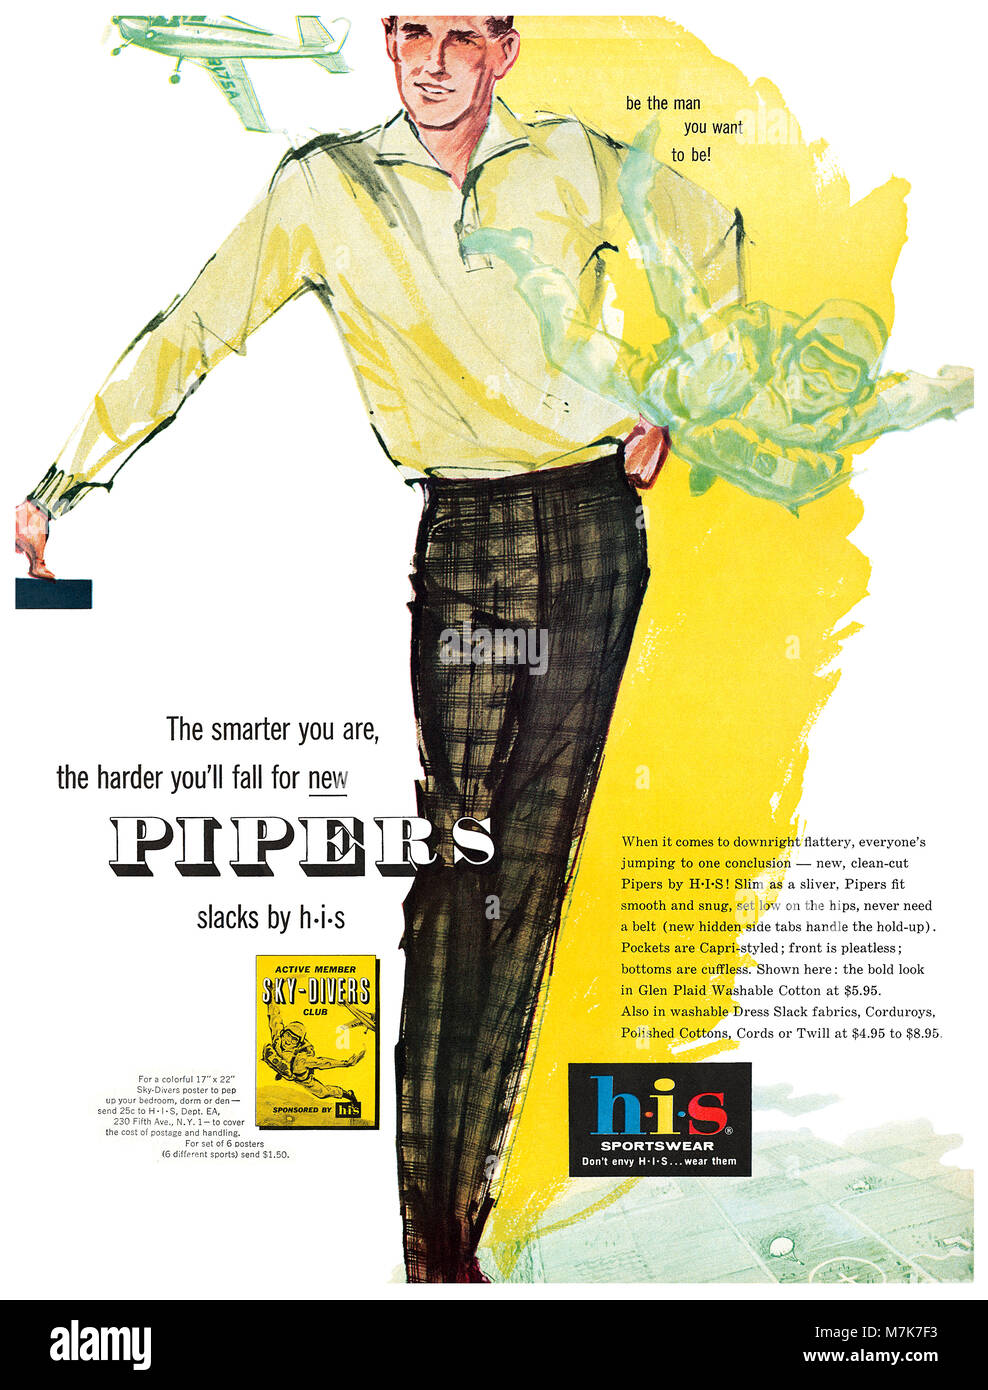 1960 U.S. advertisement for Pipers slacks by h.i.s. Stock Photo